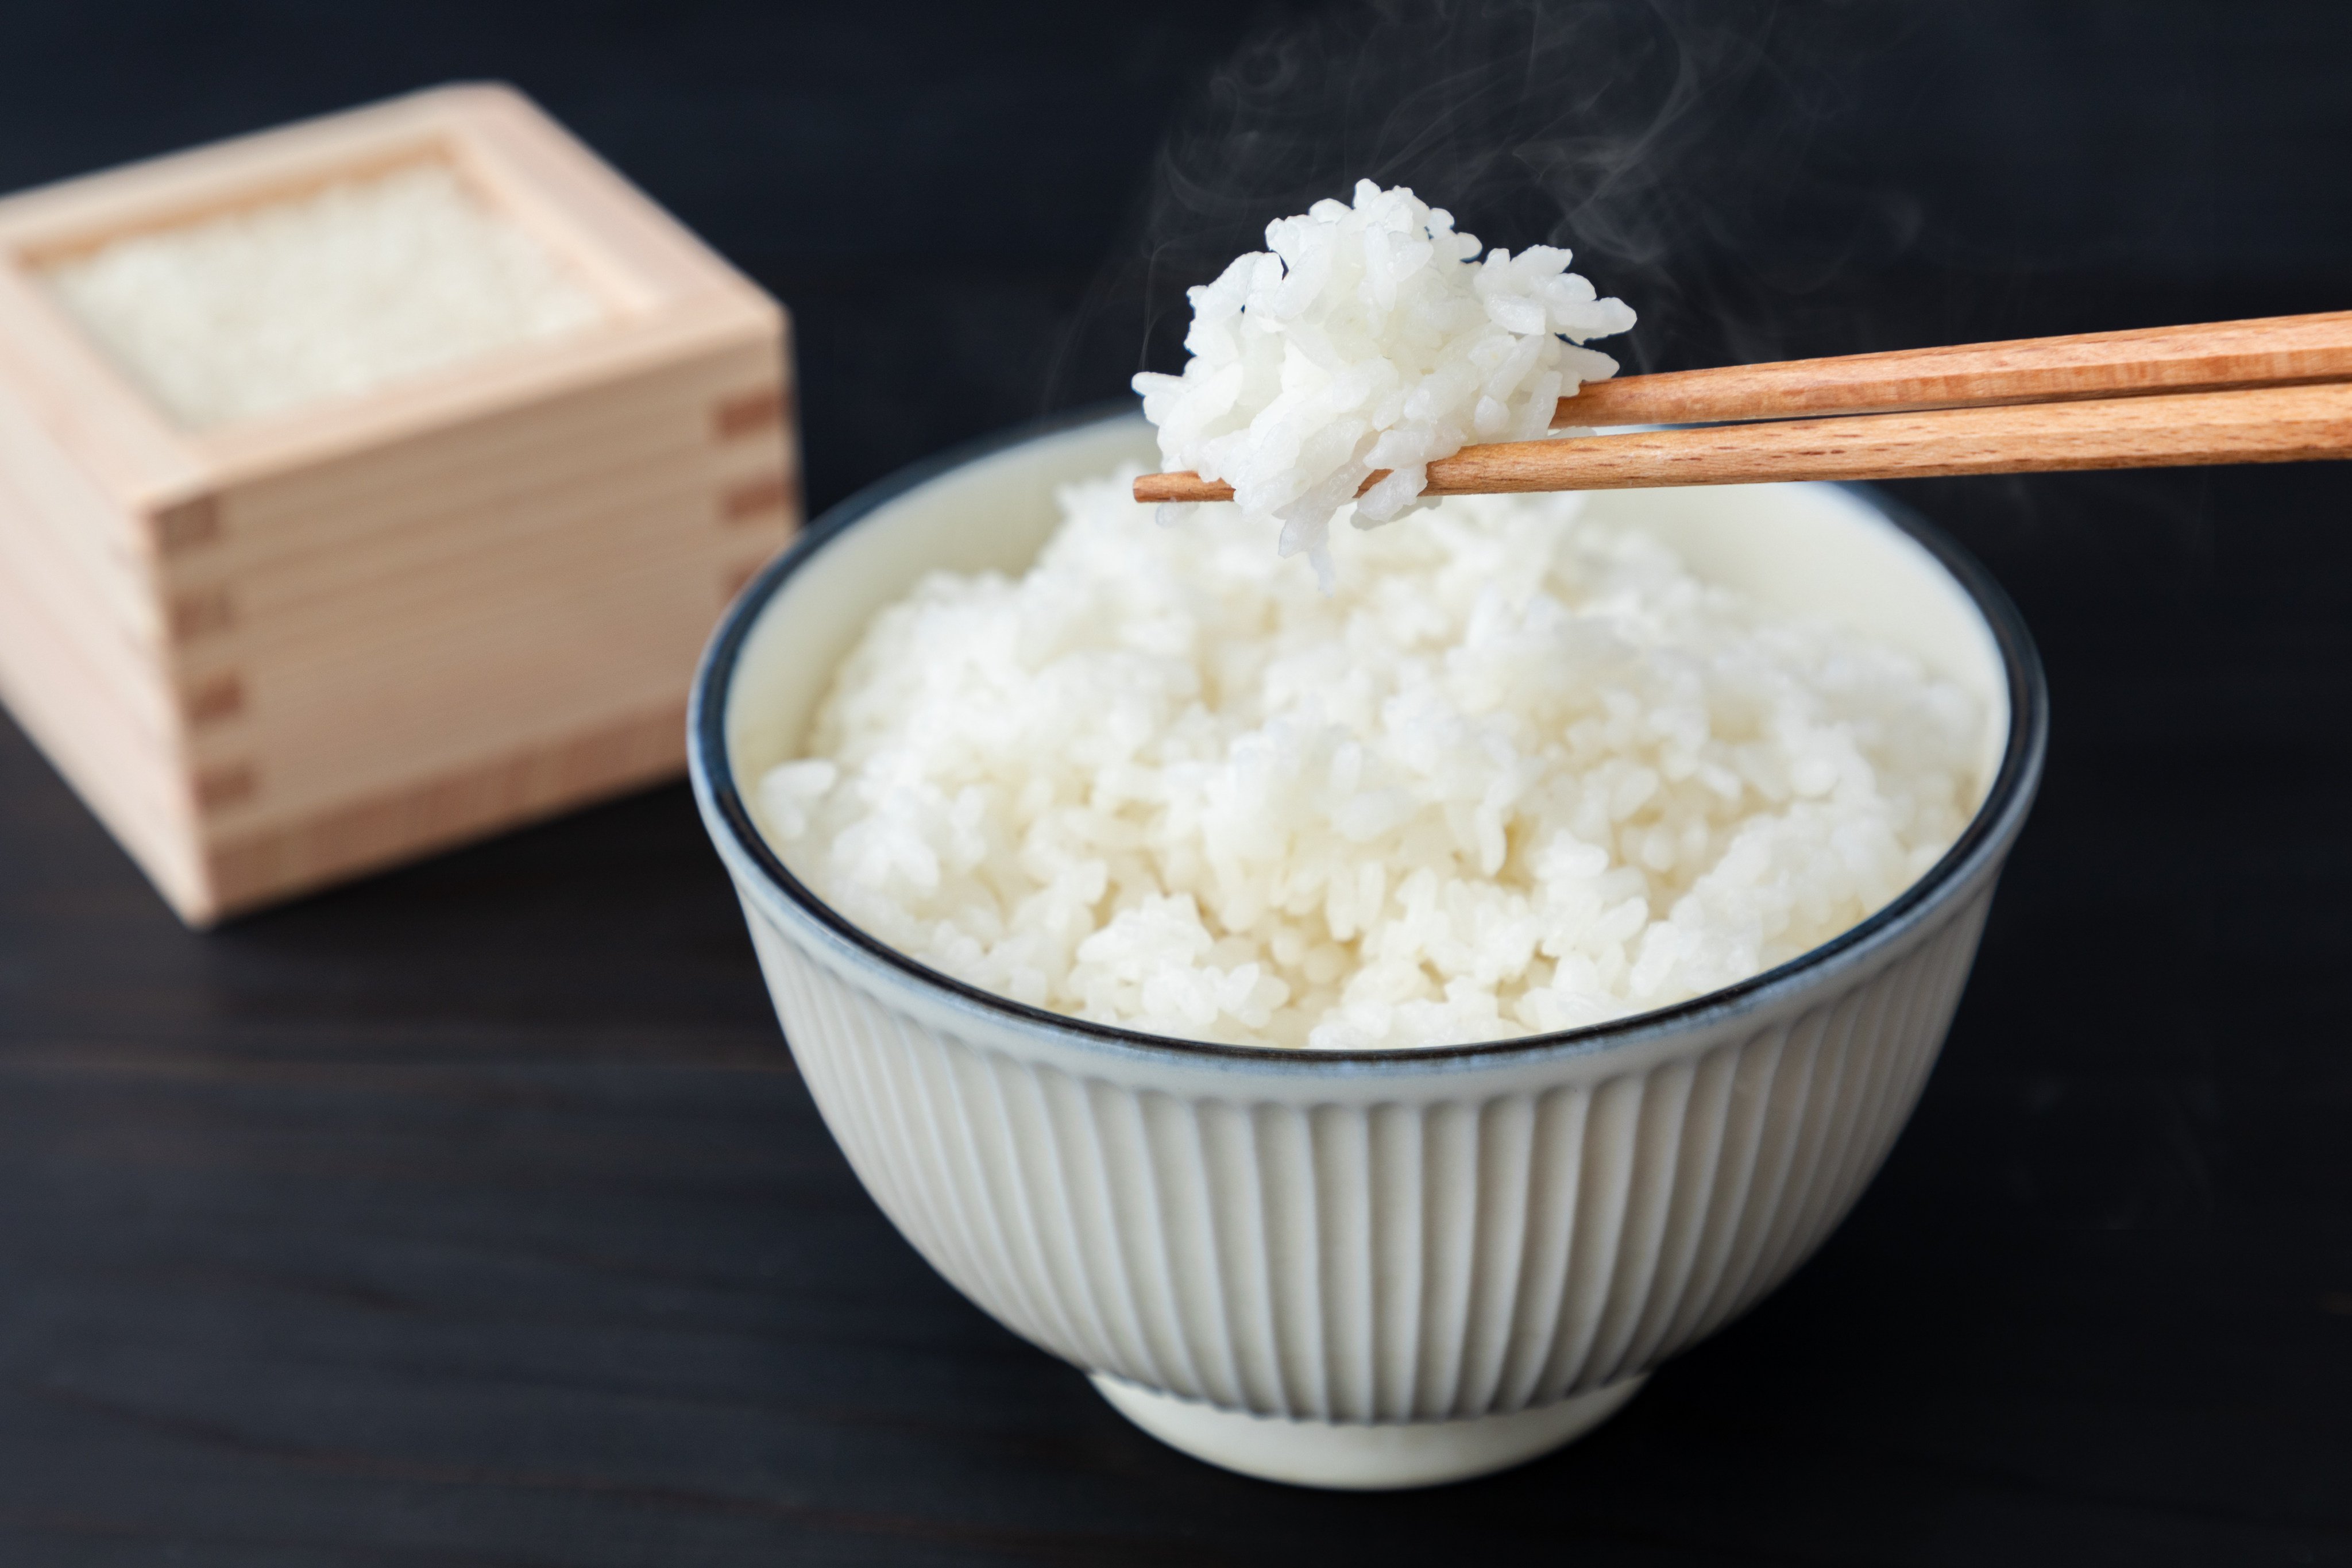 A research centre and a private company in Japan are creating a rice terminology dictionary that will attempt to standardise terms and words used to describe the way rice looks, tastes, feels and smells. Photo: Getty Images